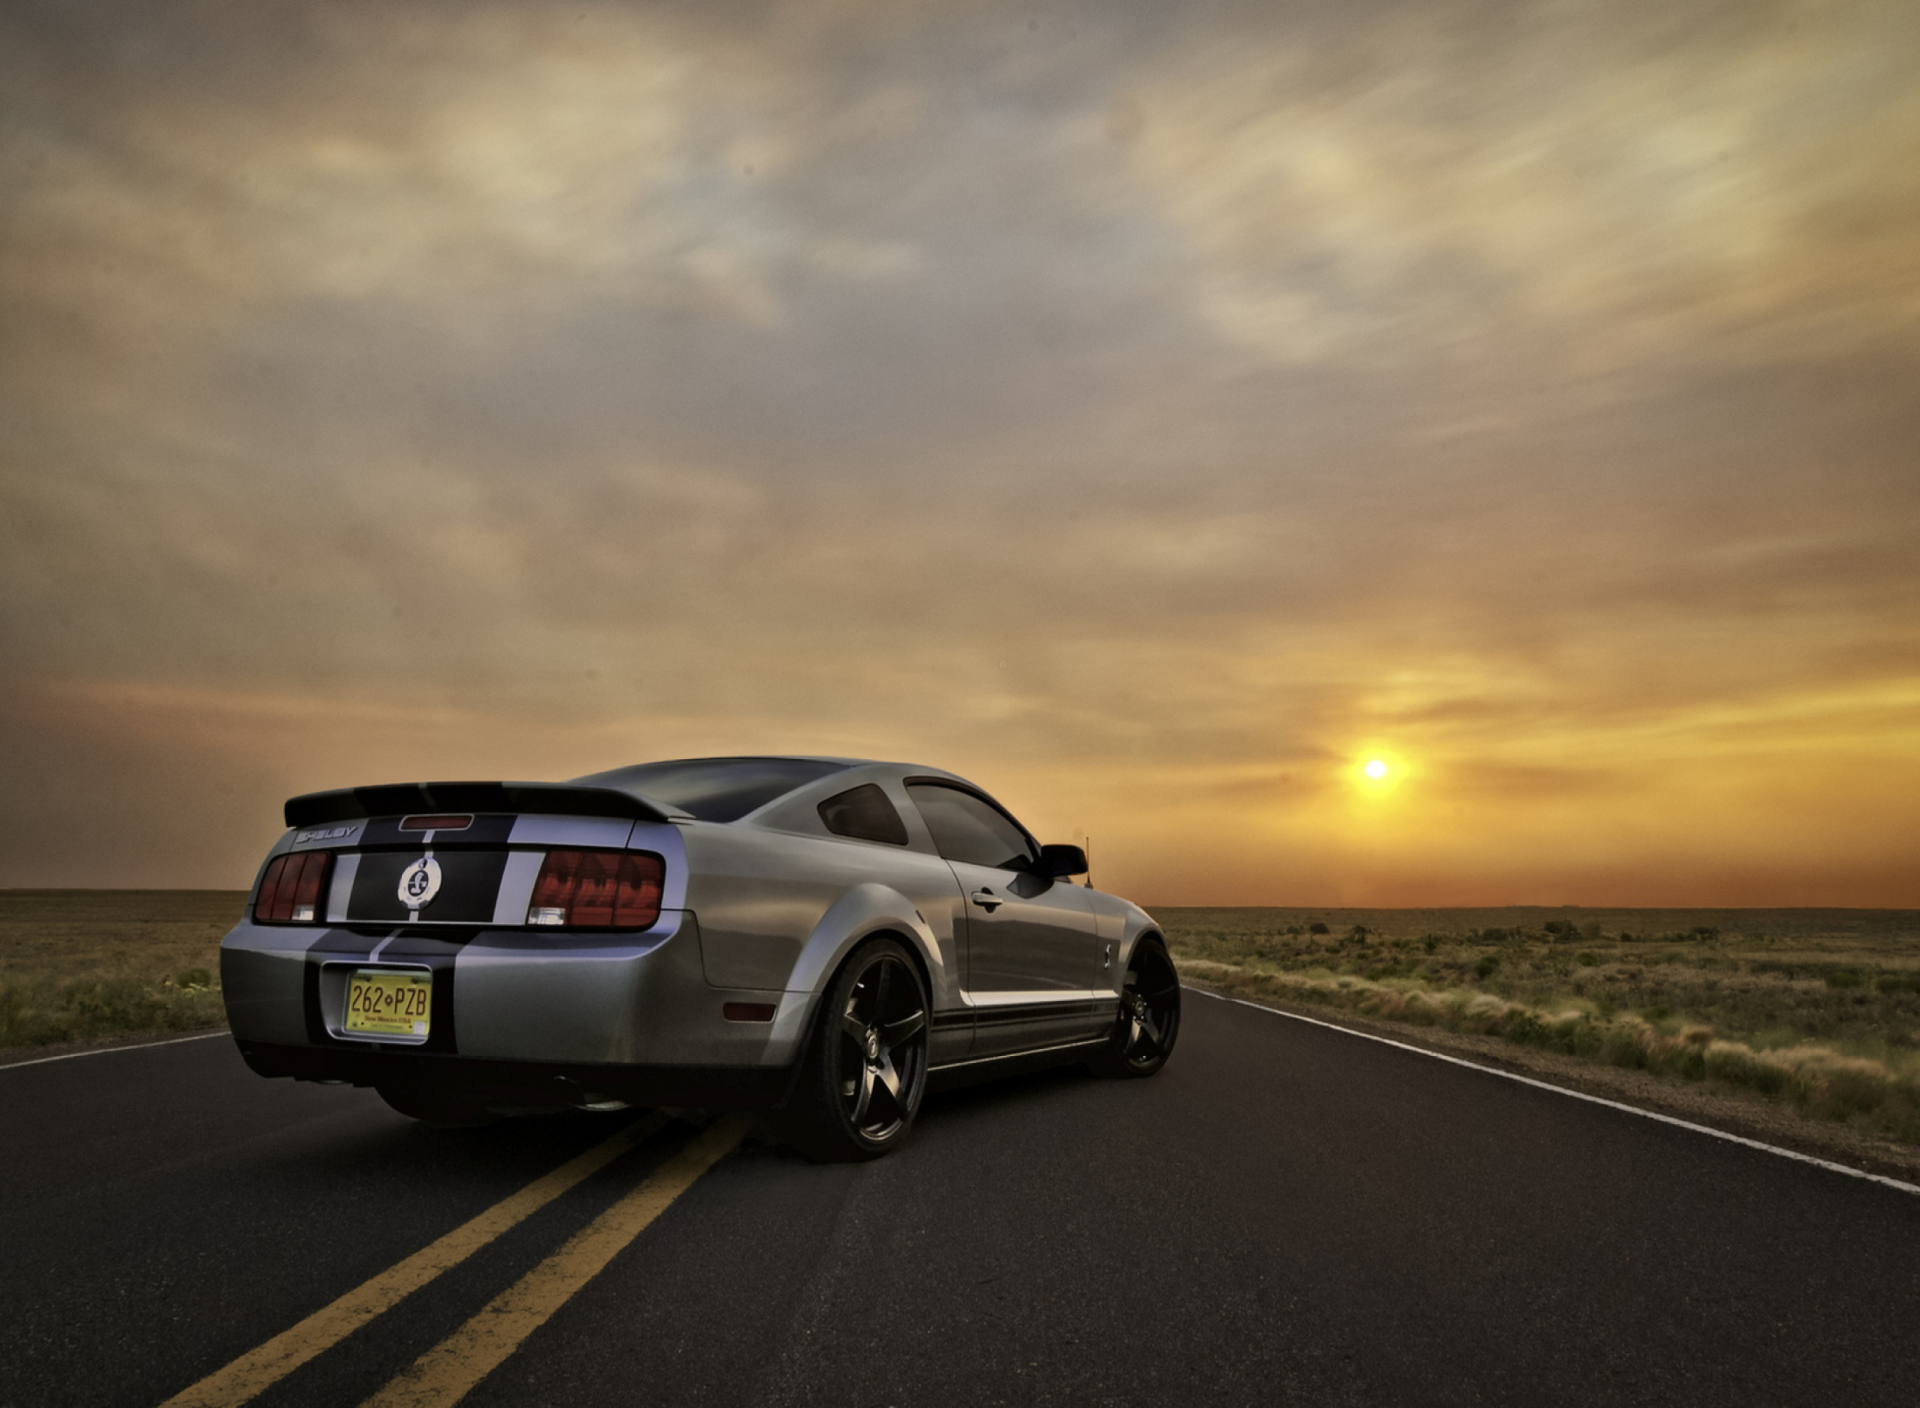 Das Ford Mustang Shelby GT500 Wallpaper 1920x1408